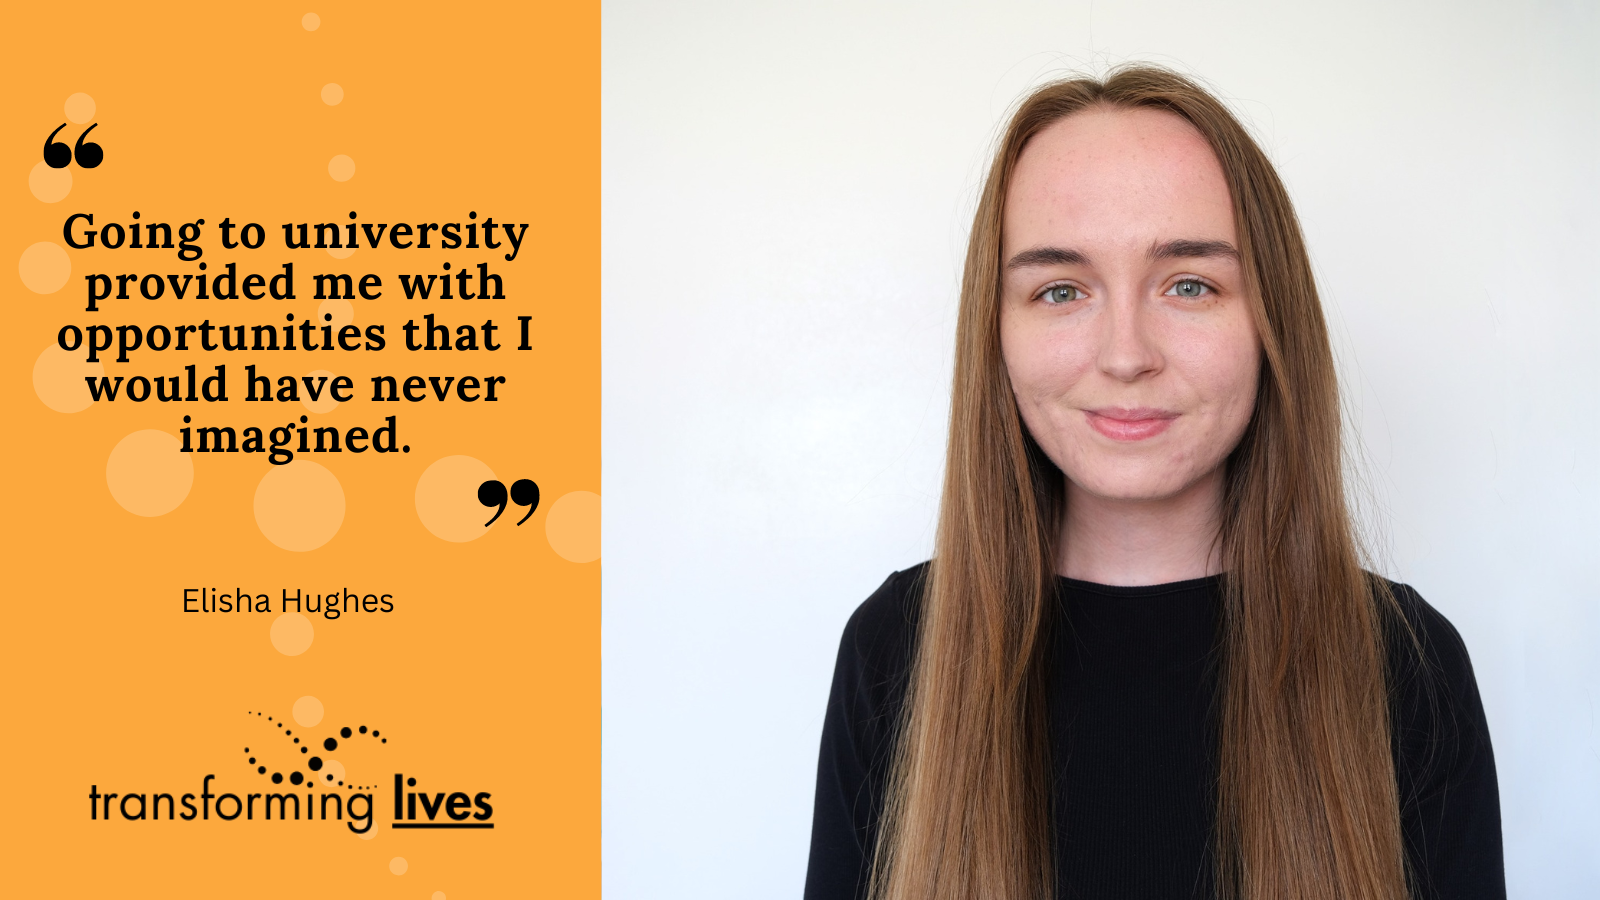 "Going to university provided me with opportunities that I would have never imagined."